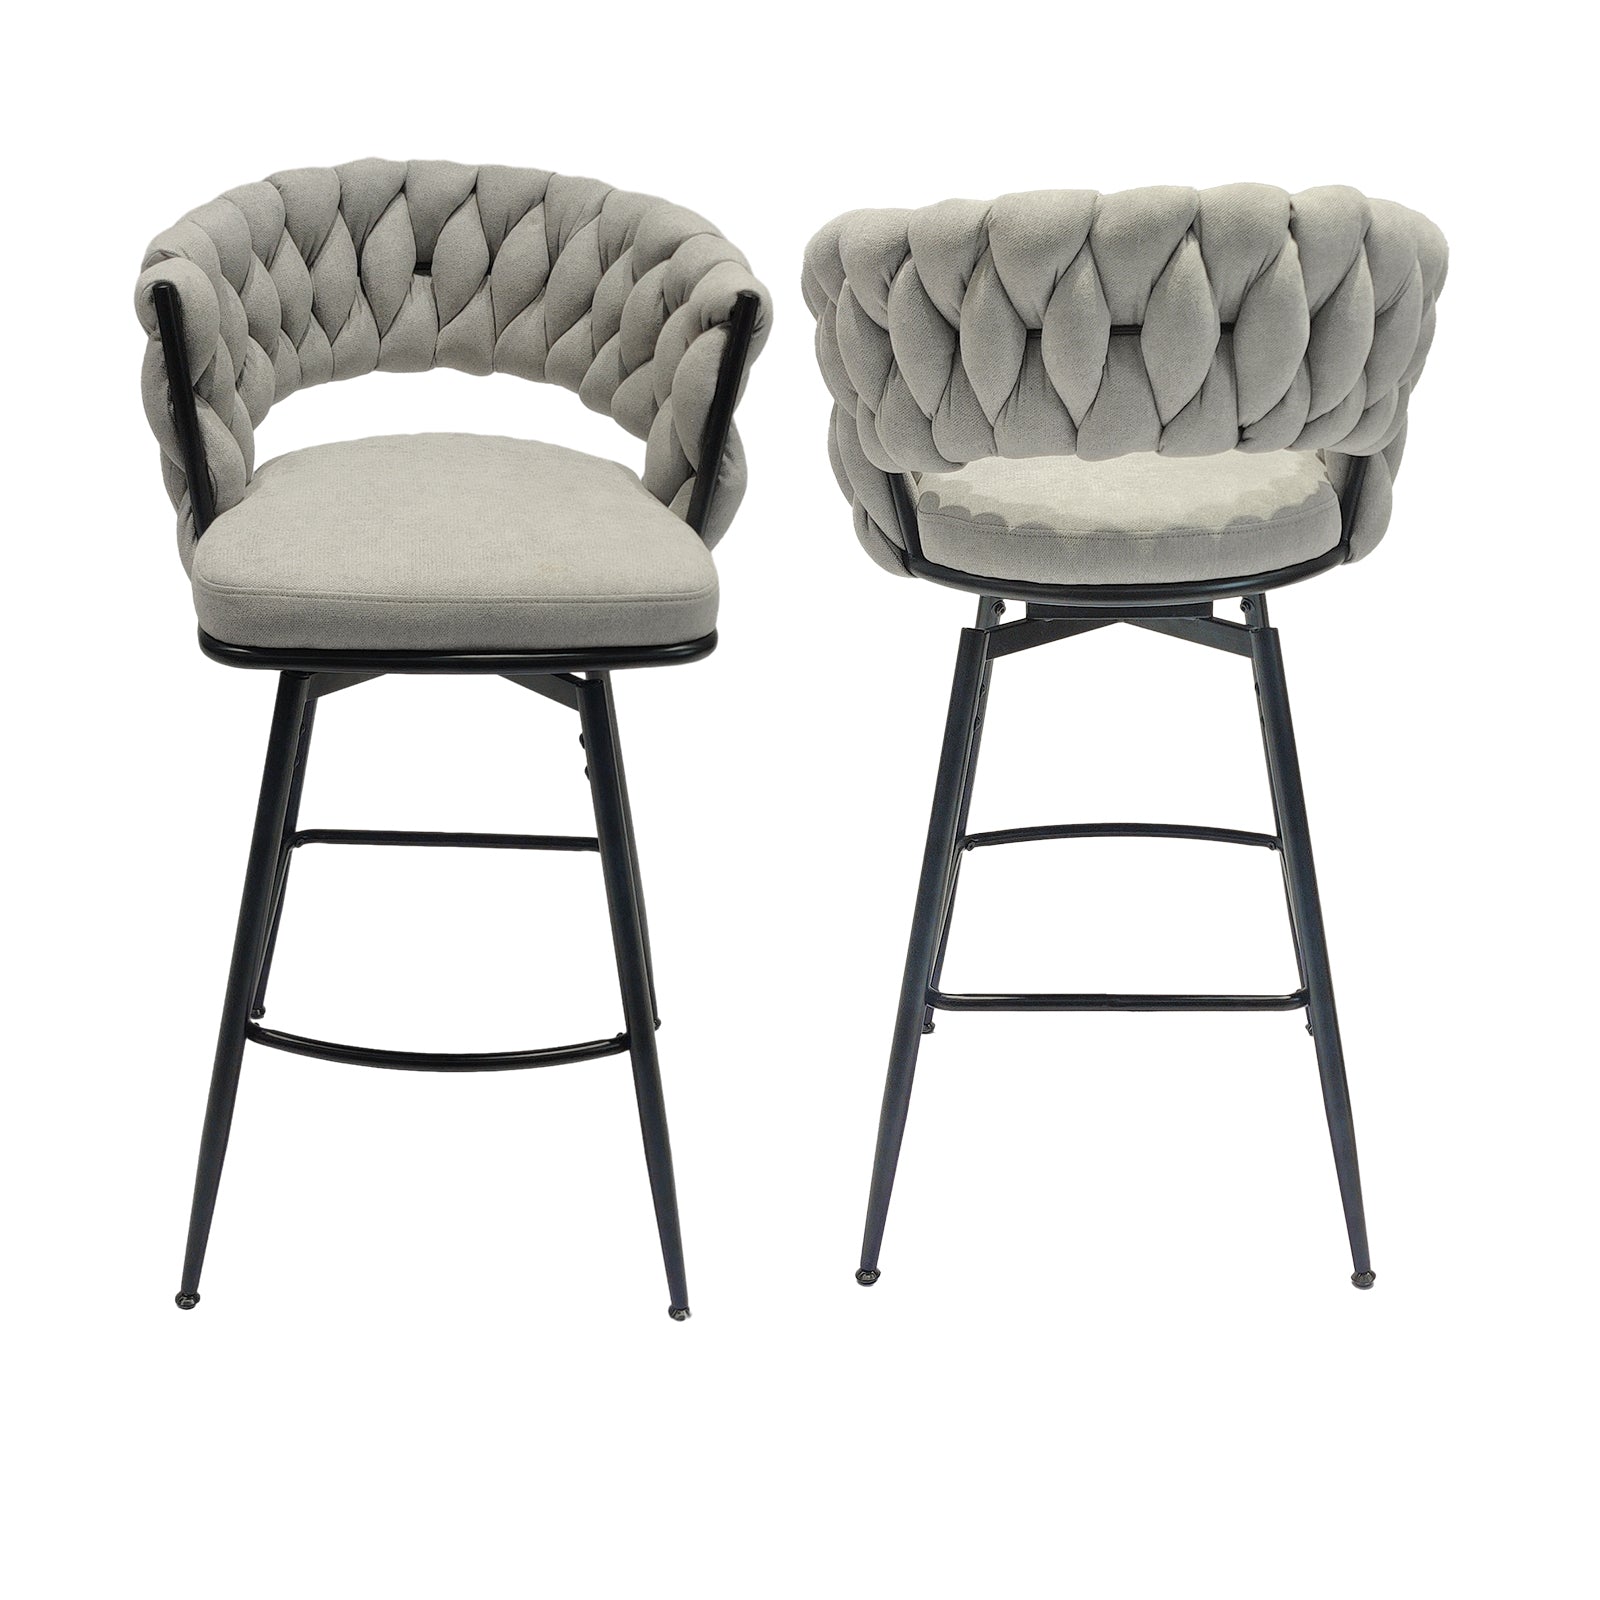 Bar Chair Linen Woven Bar Stool Set of 2,Black legs Barstools No Adjustable Kitchen Island Chairs,360 Swivel Bar Stools Upholstered Bar Chair Counter Stool Arm Chairs with Back Footrest, (Grey) - Enova Luxe Home Store